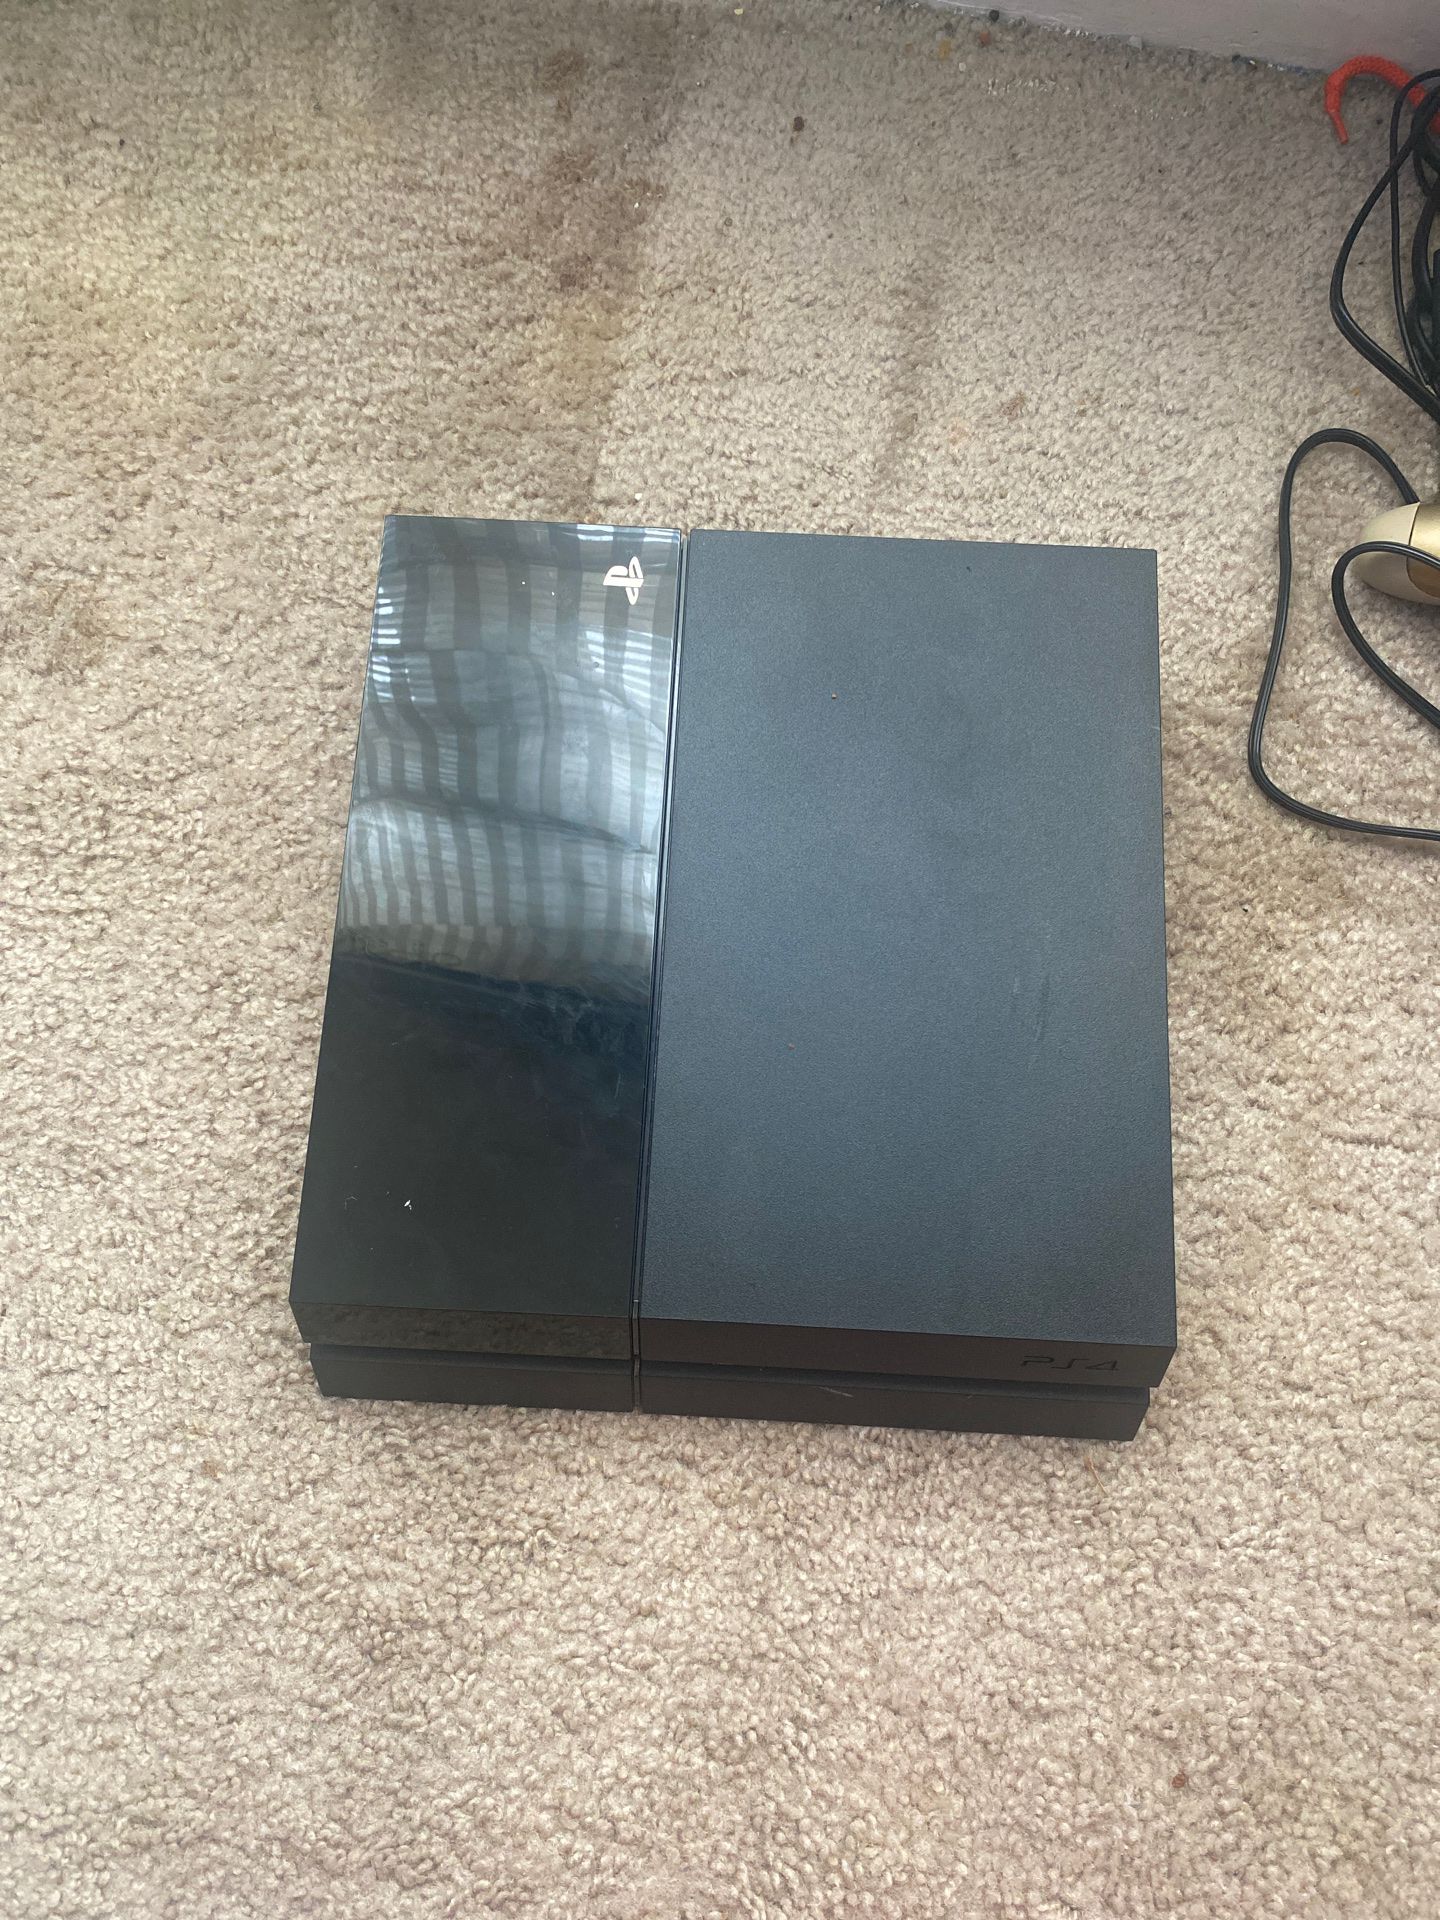 PS4 “I DONT HAVE THE CORDS FOR IT”